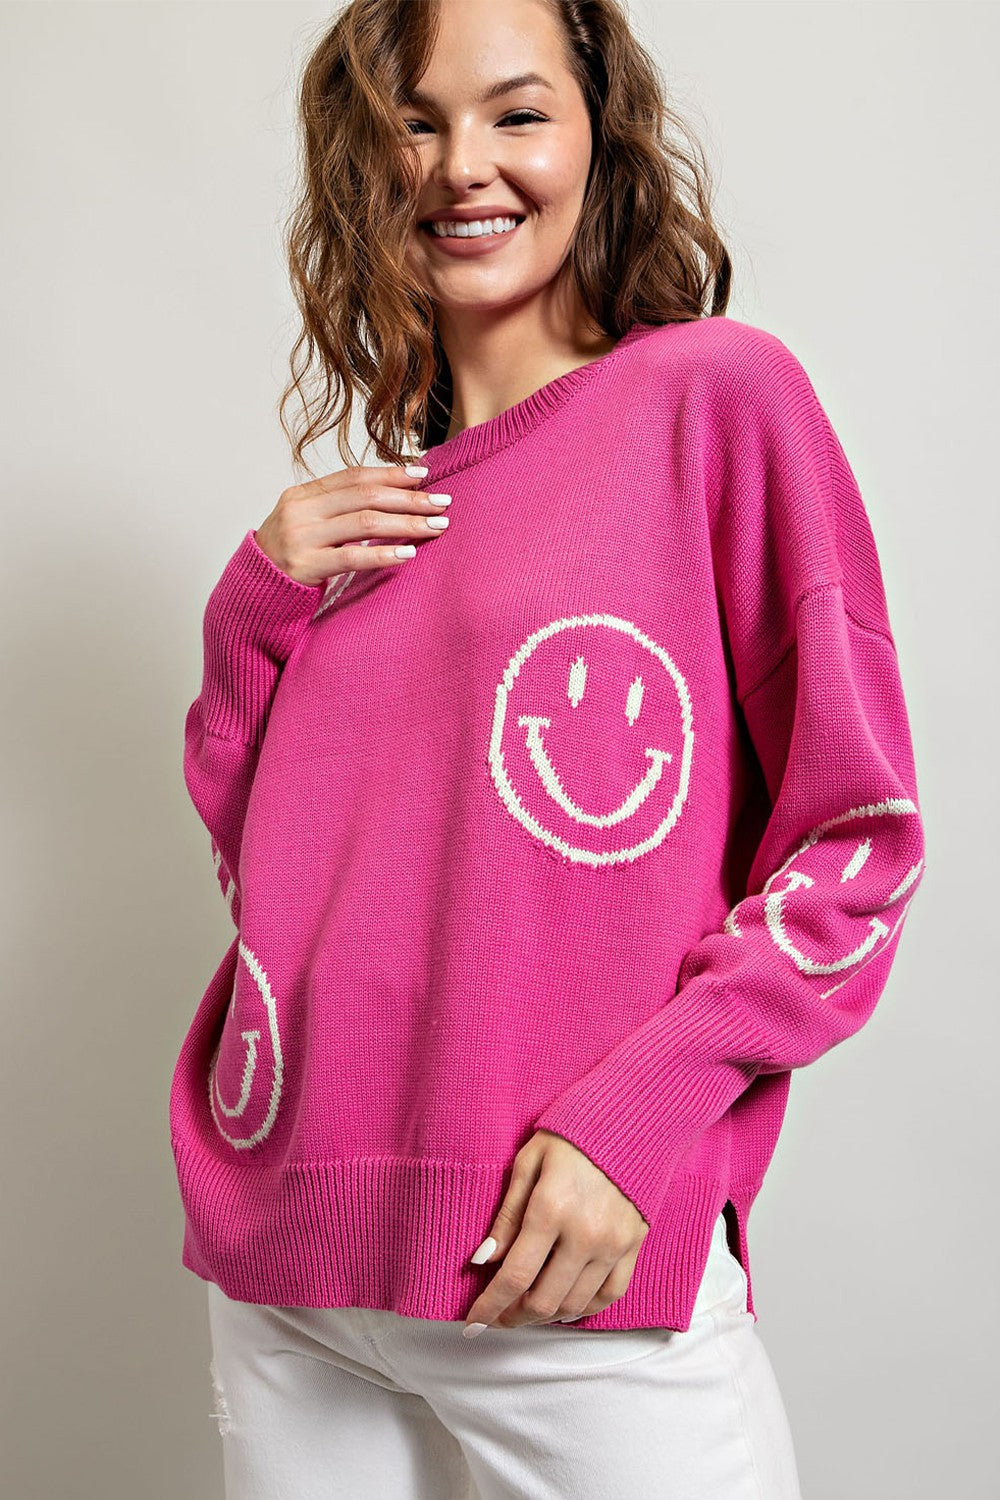 SMILE PATTERN KNIT SWEATER TOP